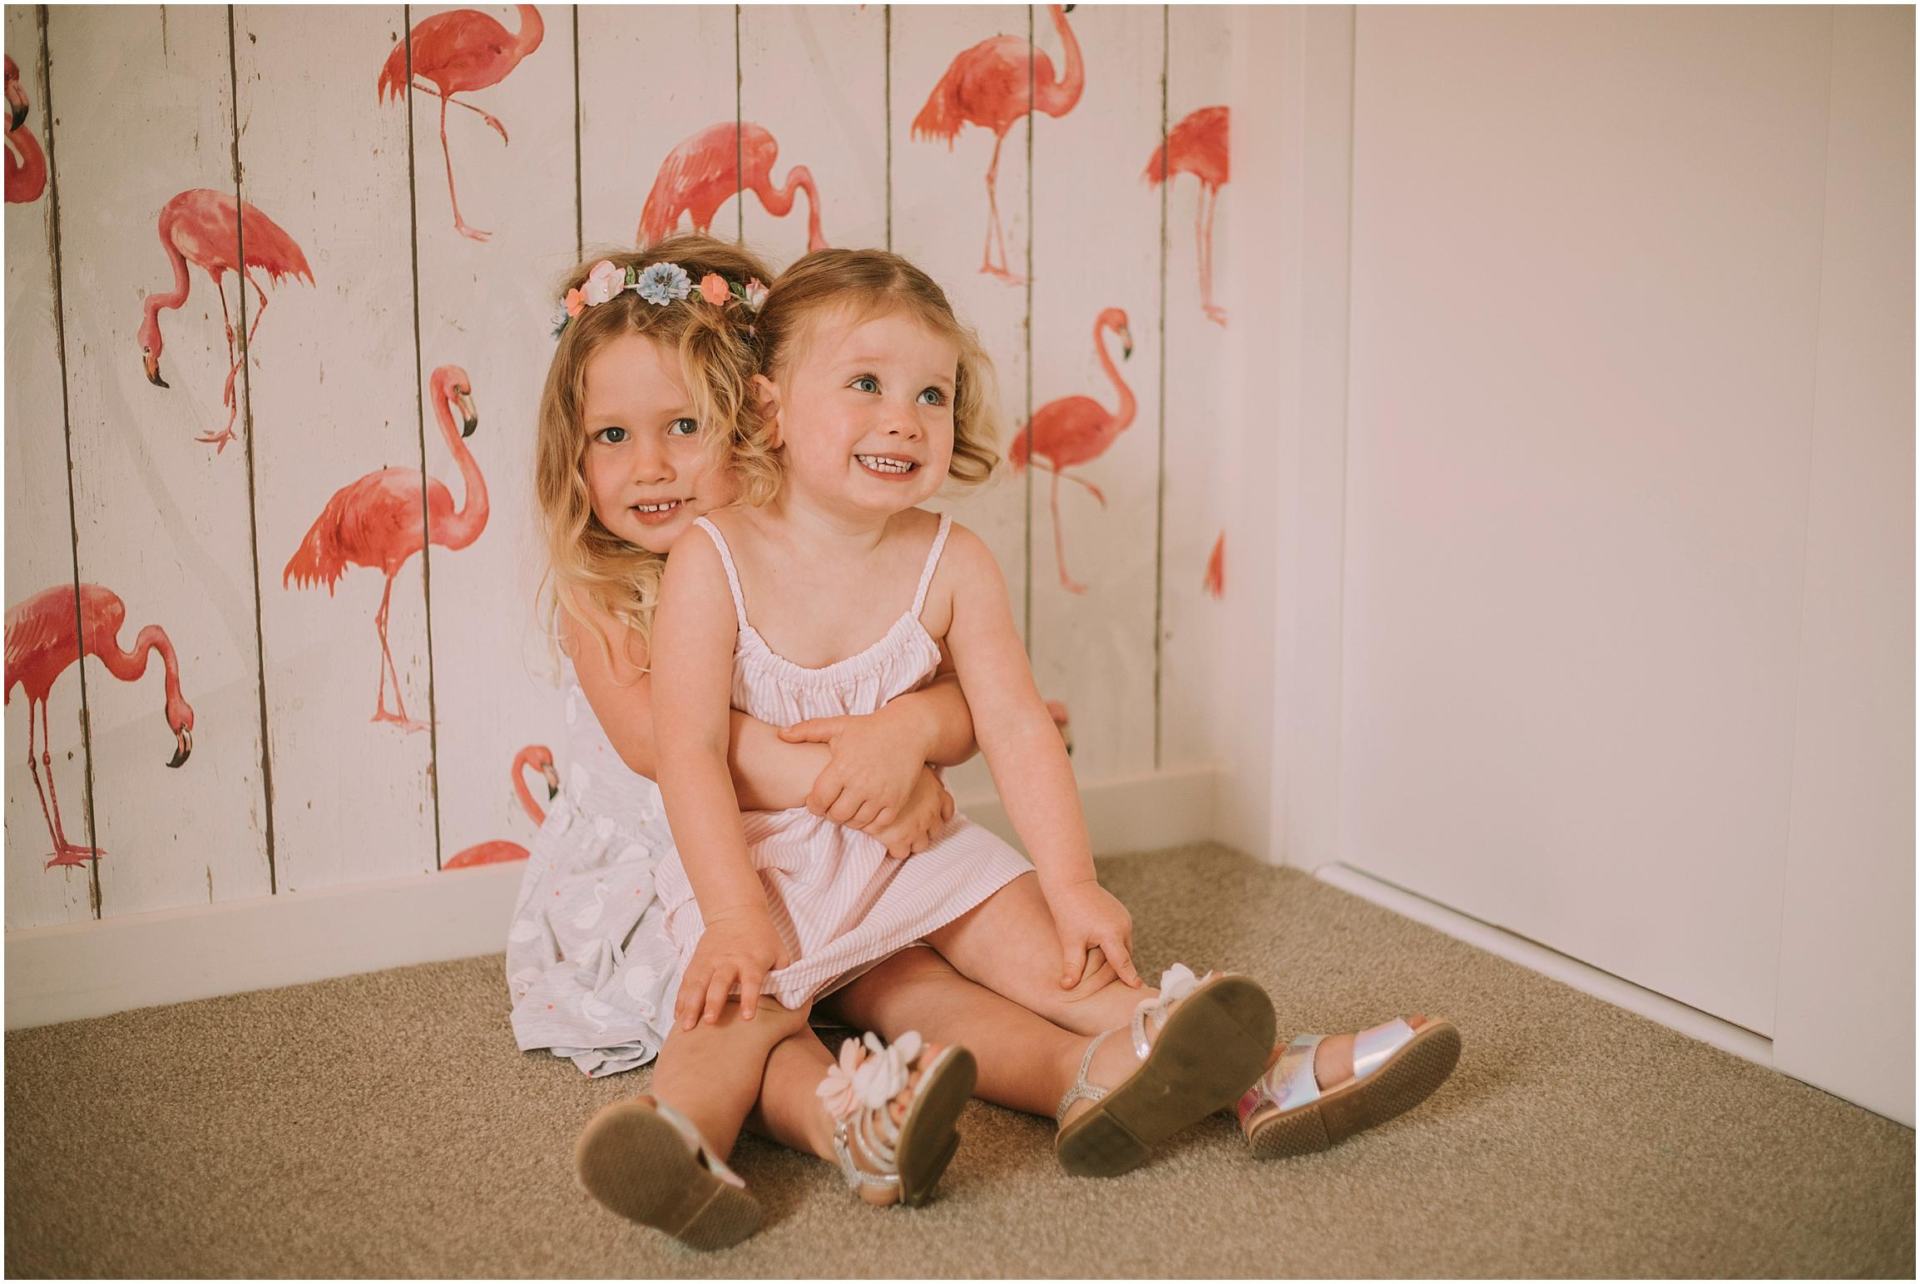 Charlotte Kiri Photography - Family Photography of a couple of young sisters hugging and smiling, as the younger girl with cute pigtails sits on her sister's lap, who wears a pretty floral wreath, in front of flamingo wallpaper in Wanaka, New Zealand.